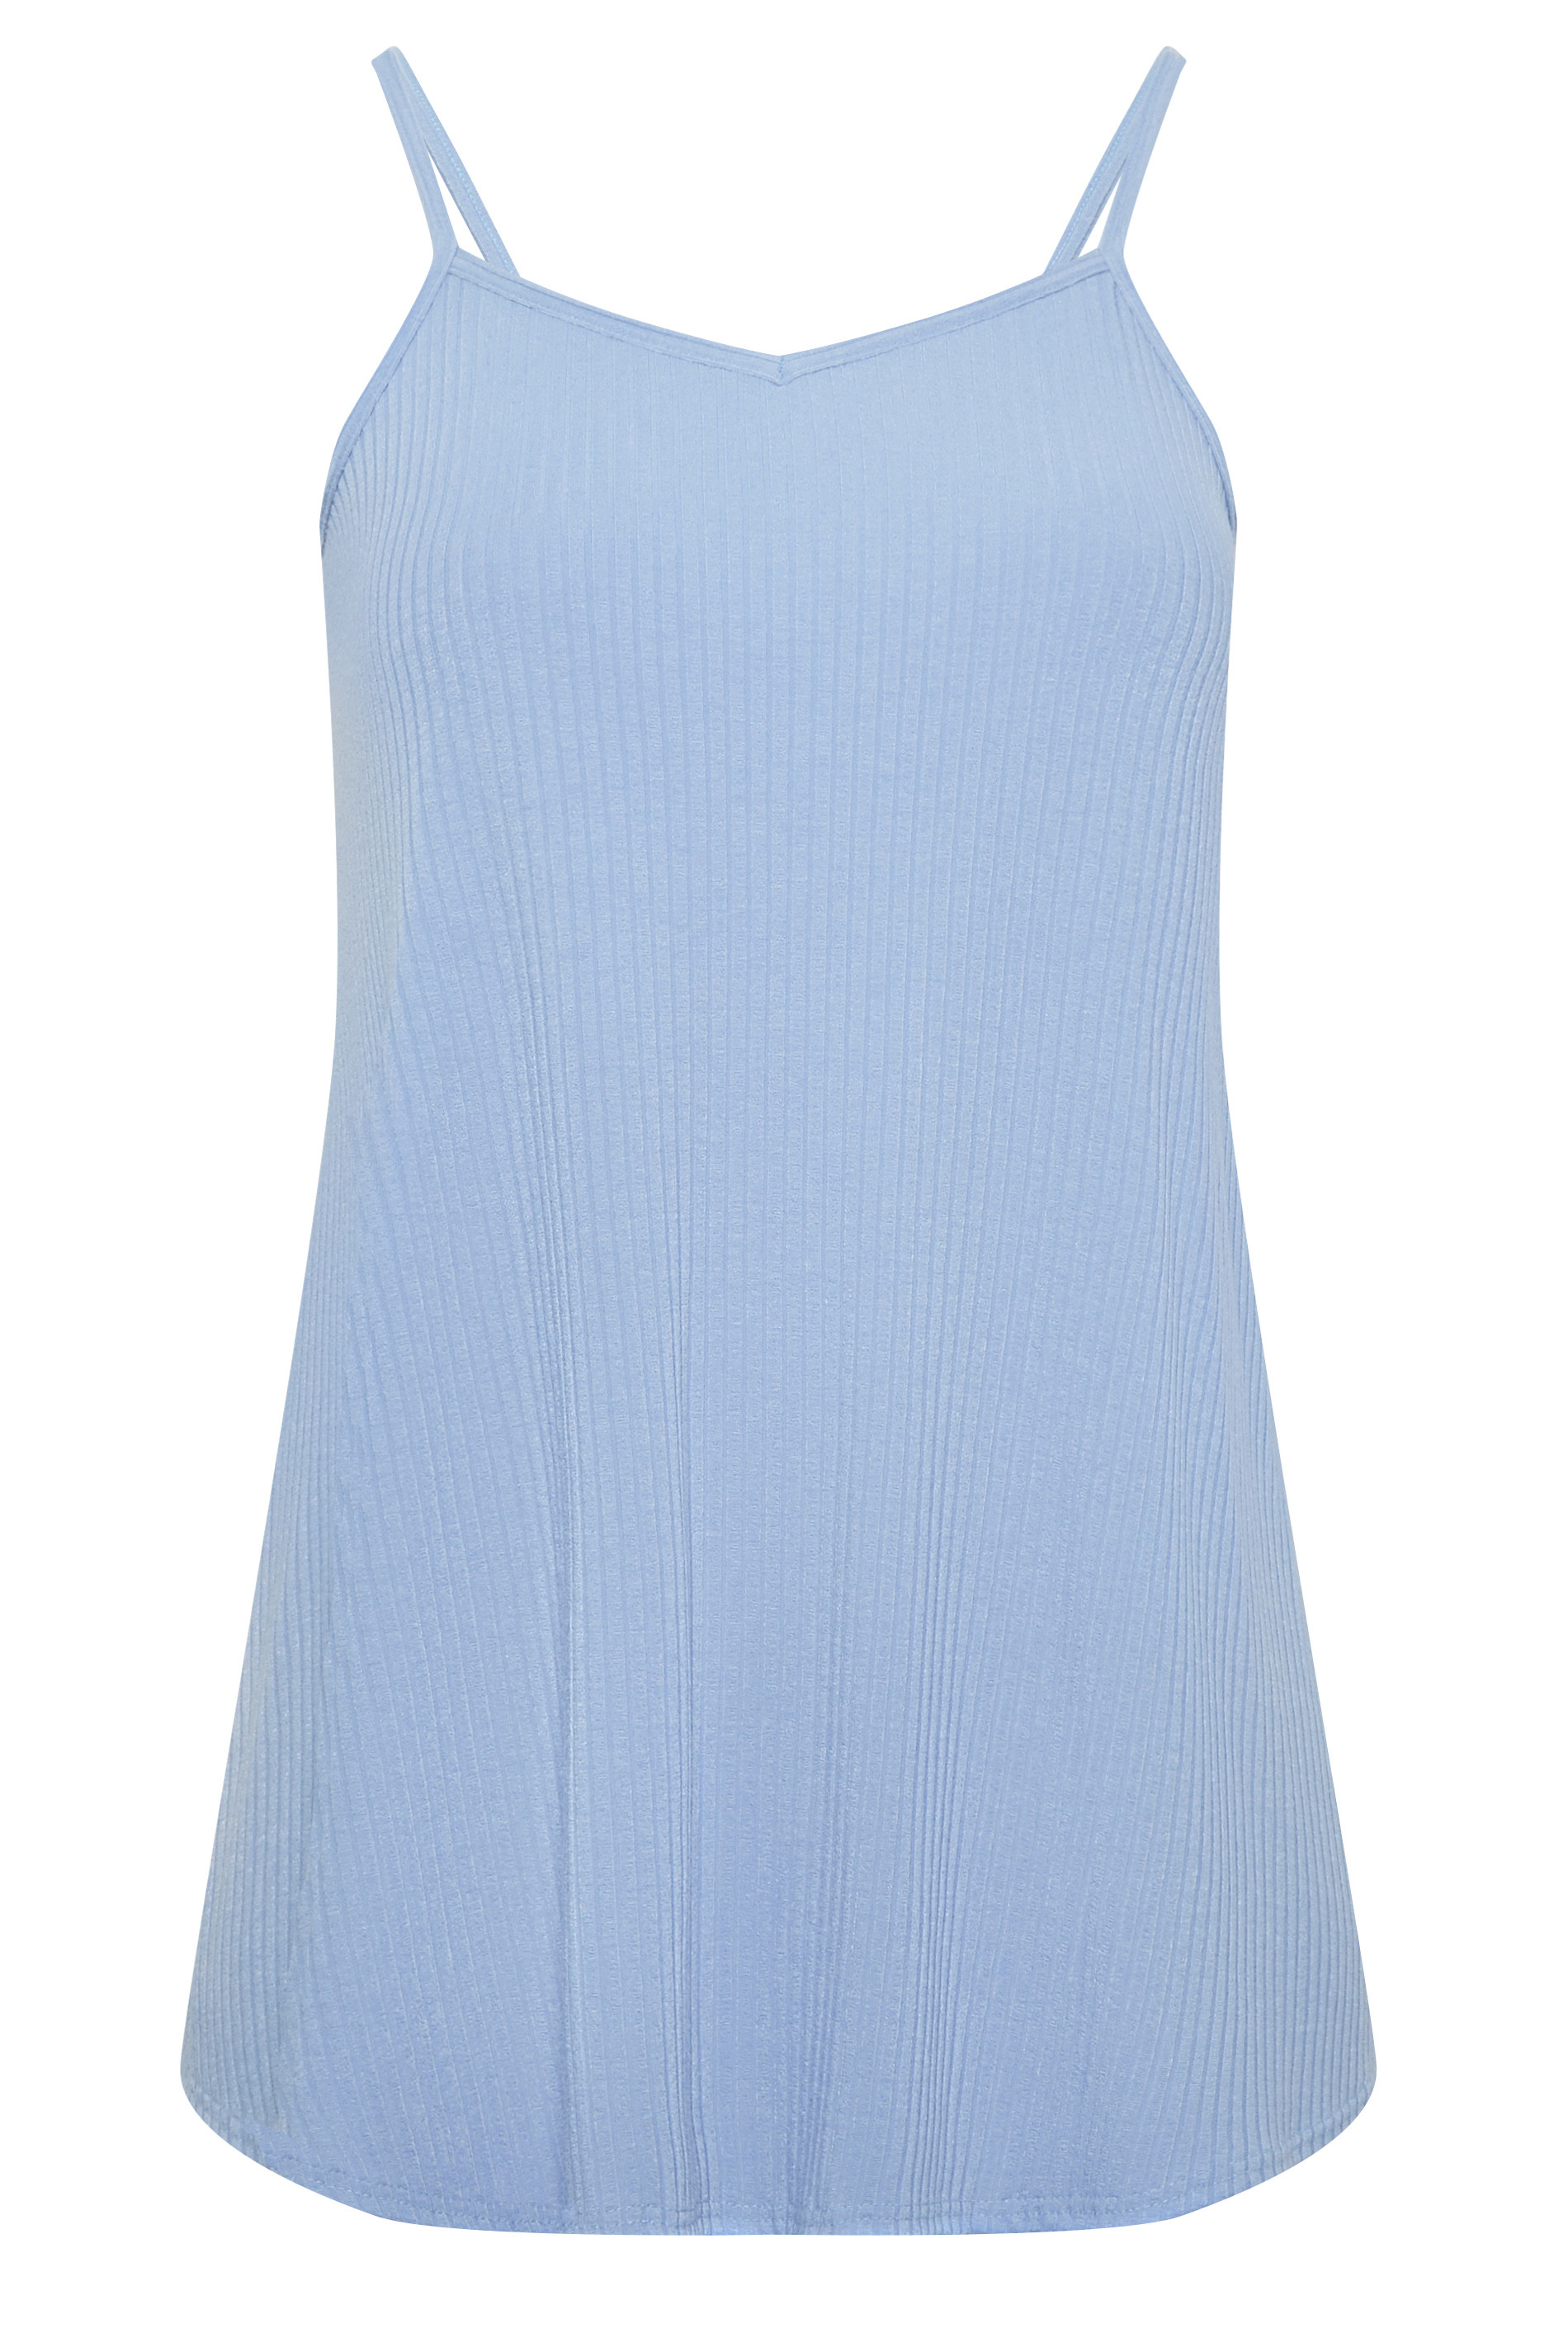 YOURS Curve Plus Size Baby Blue Ribbed Swing Cami Vest Top